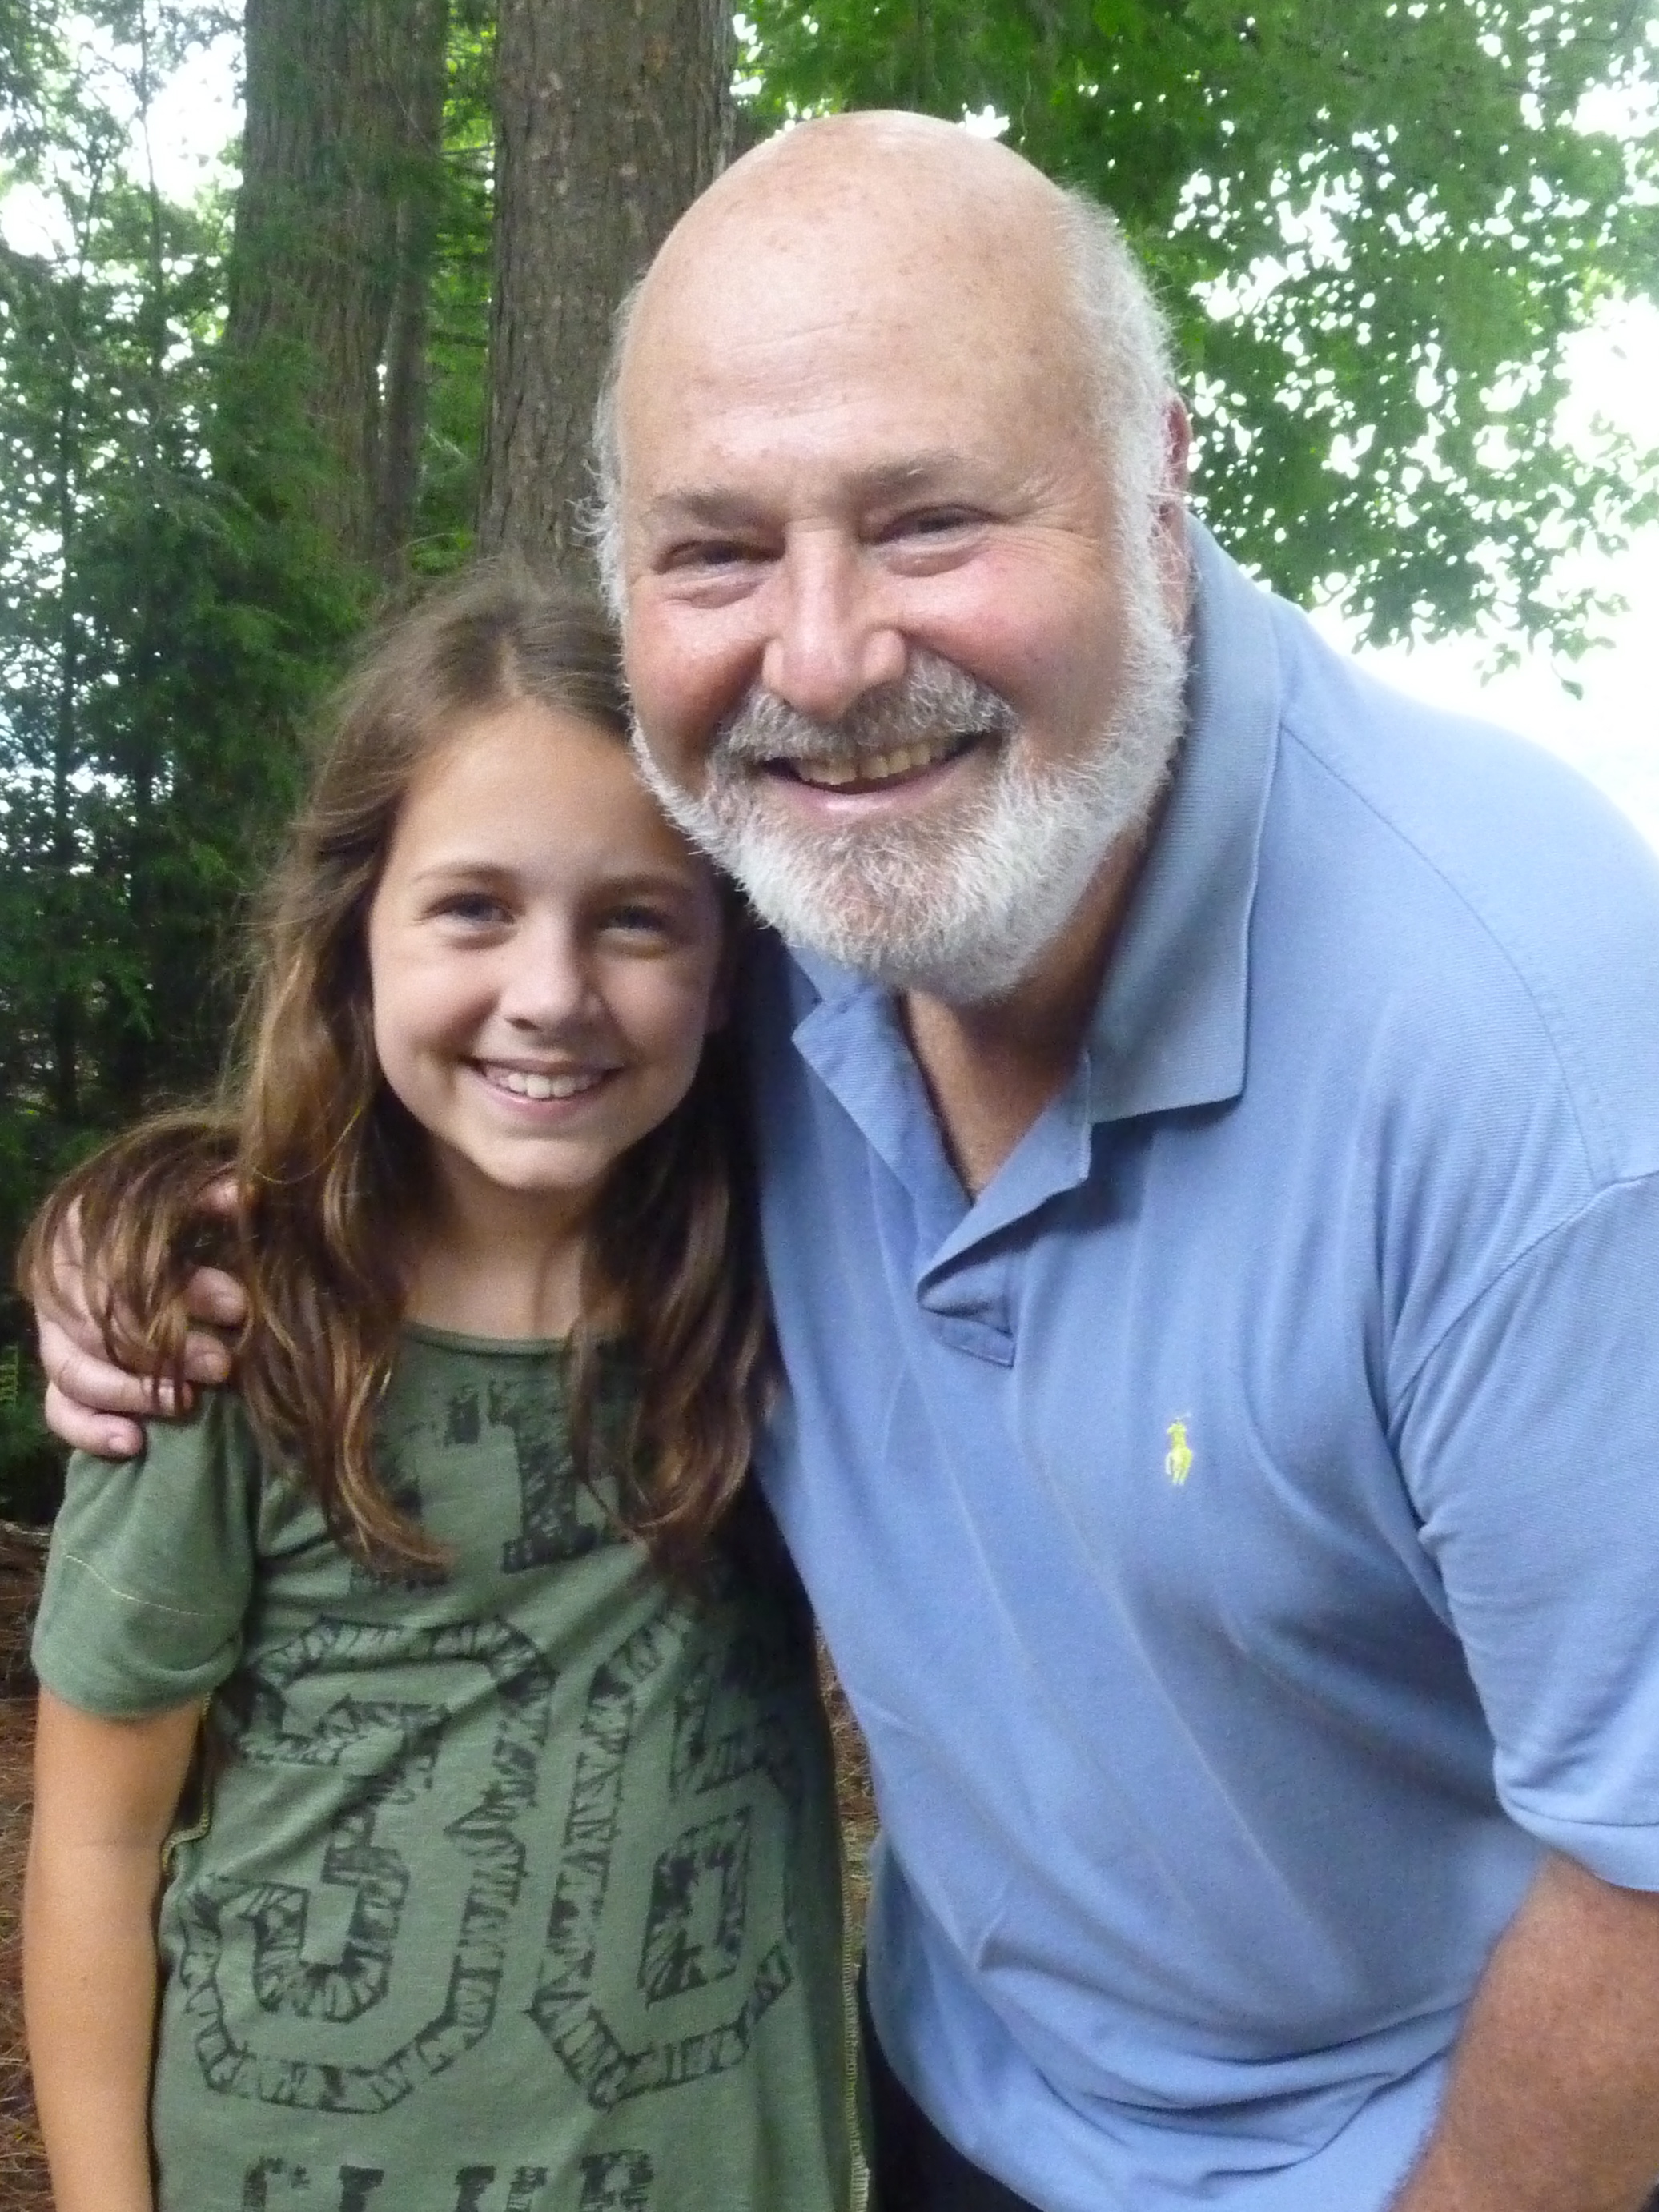 Director, Rob Reiner, and Emma Fuhrmann on the set of THE MAGIC OF BELLE ISLE